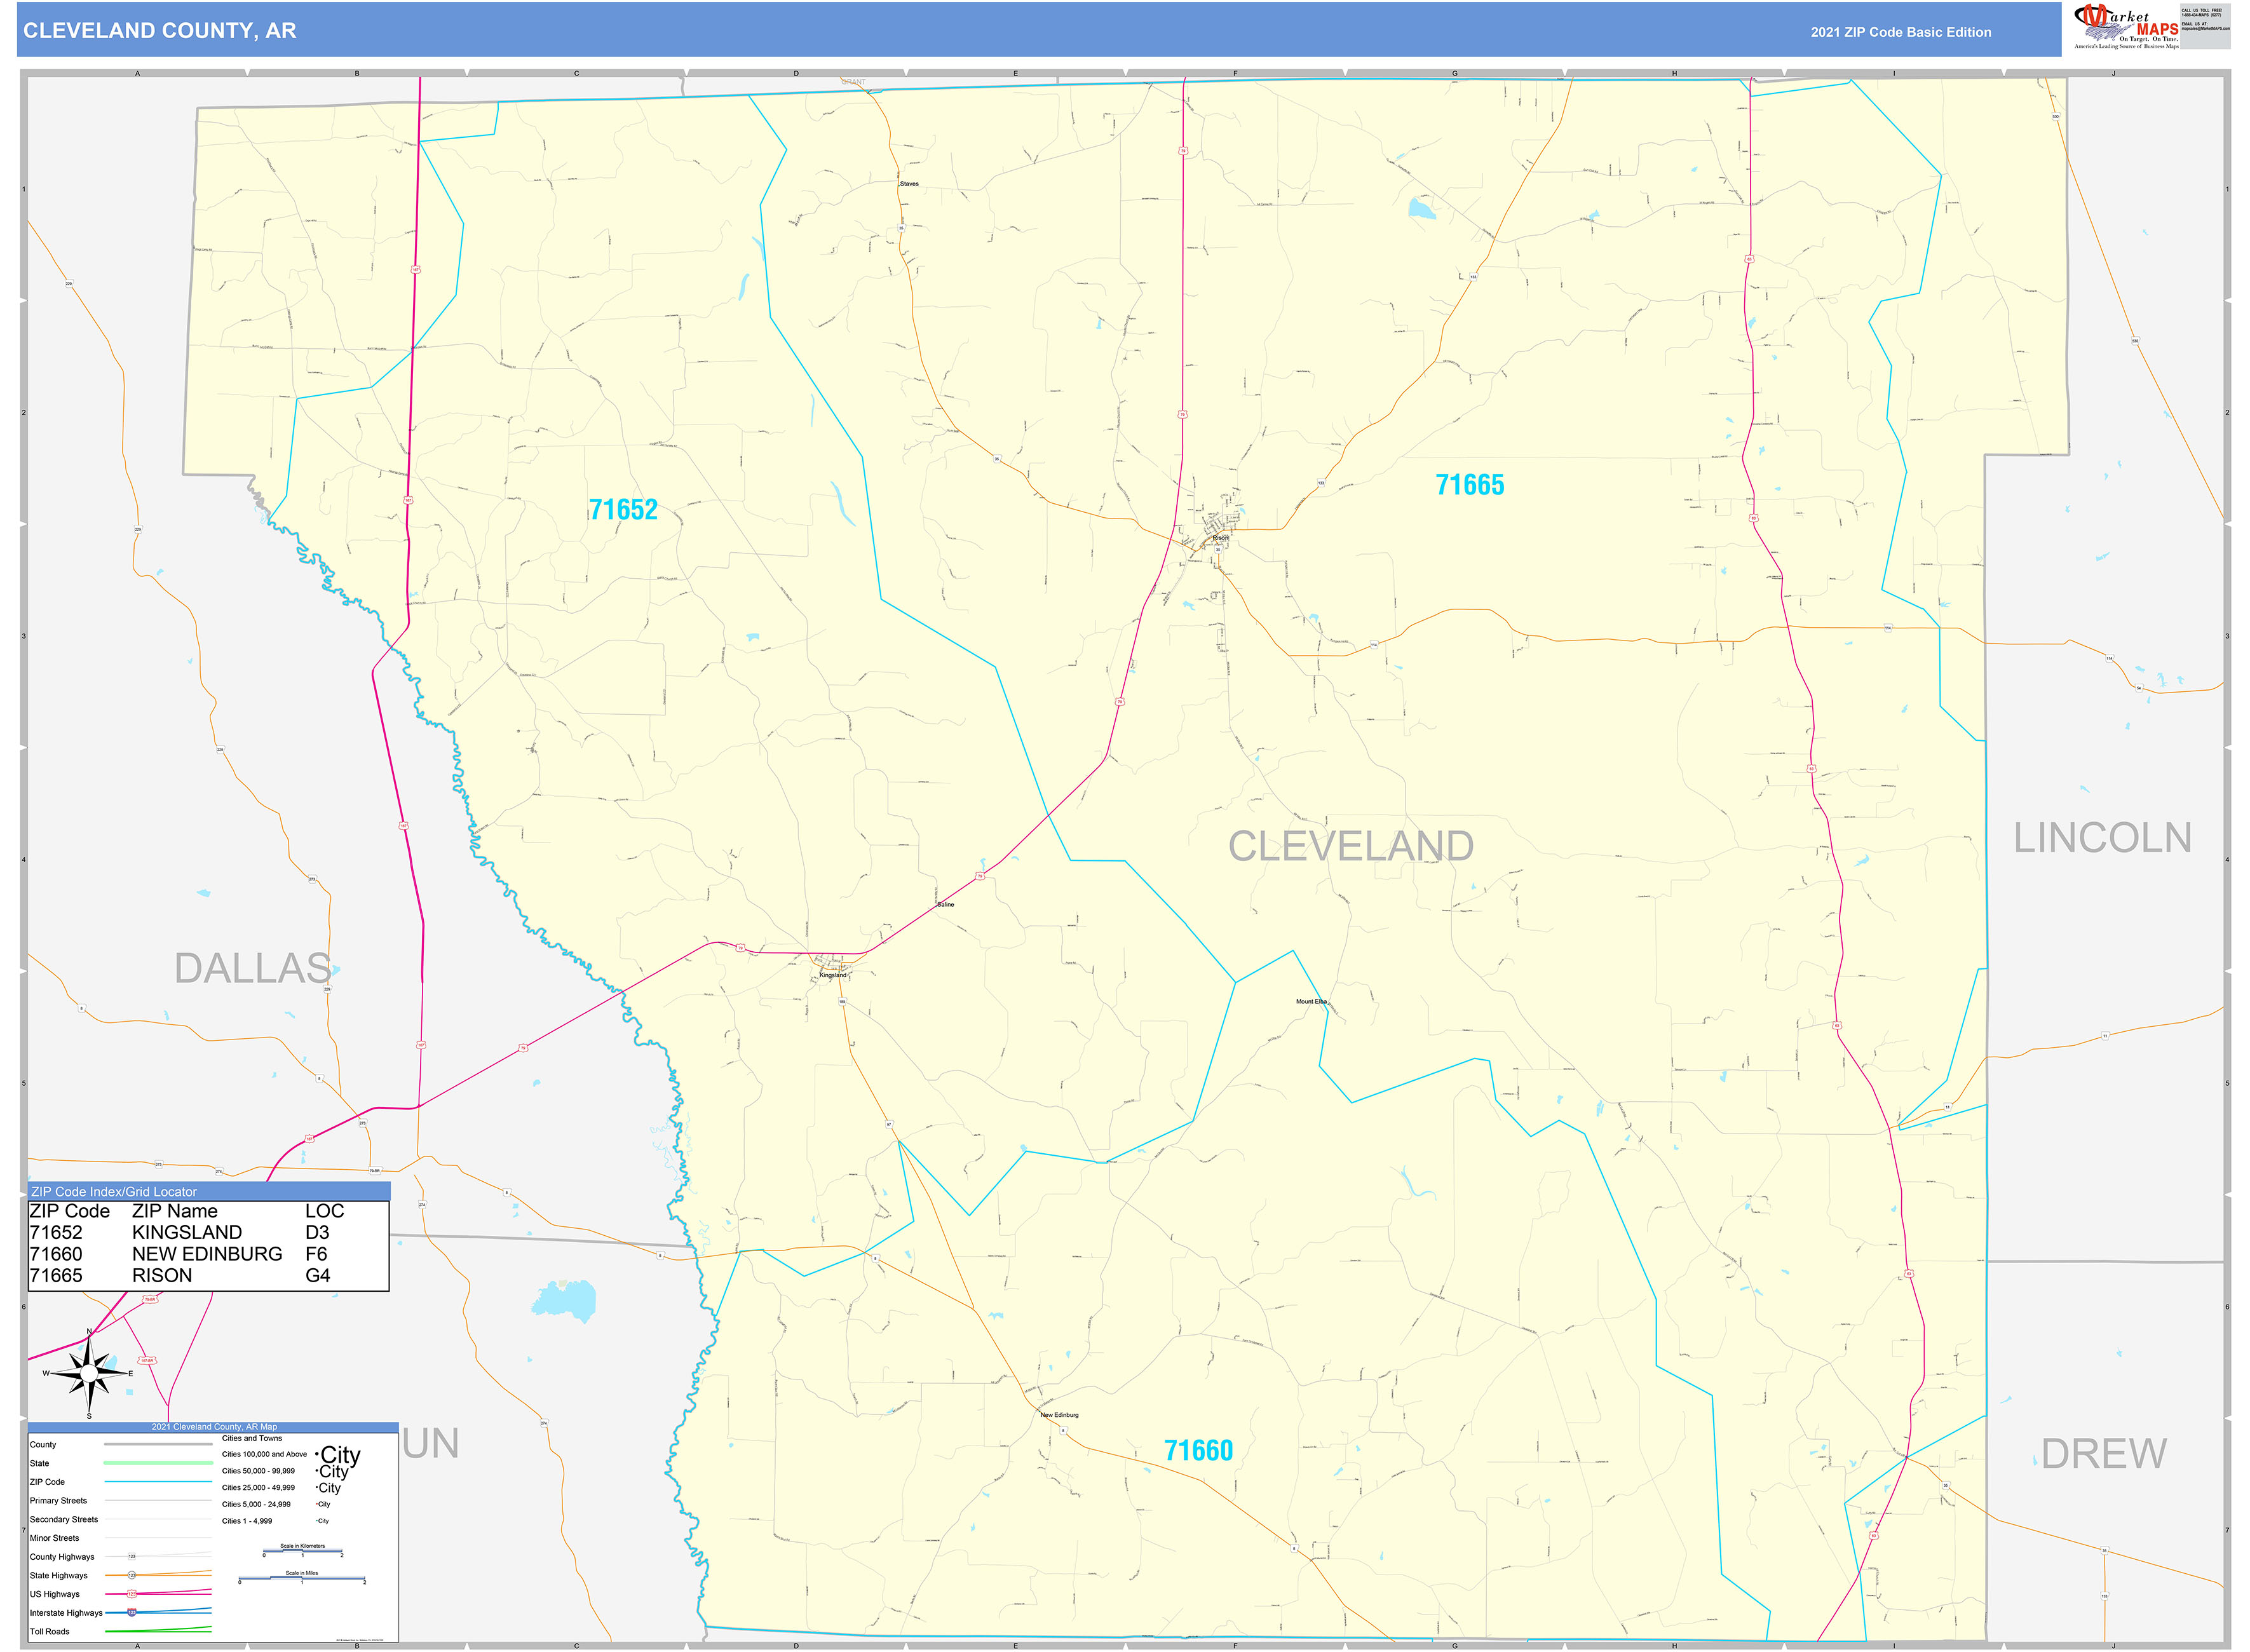 Cleveland County AR Zip Code Wall Map Basic Style by MarketMAPS